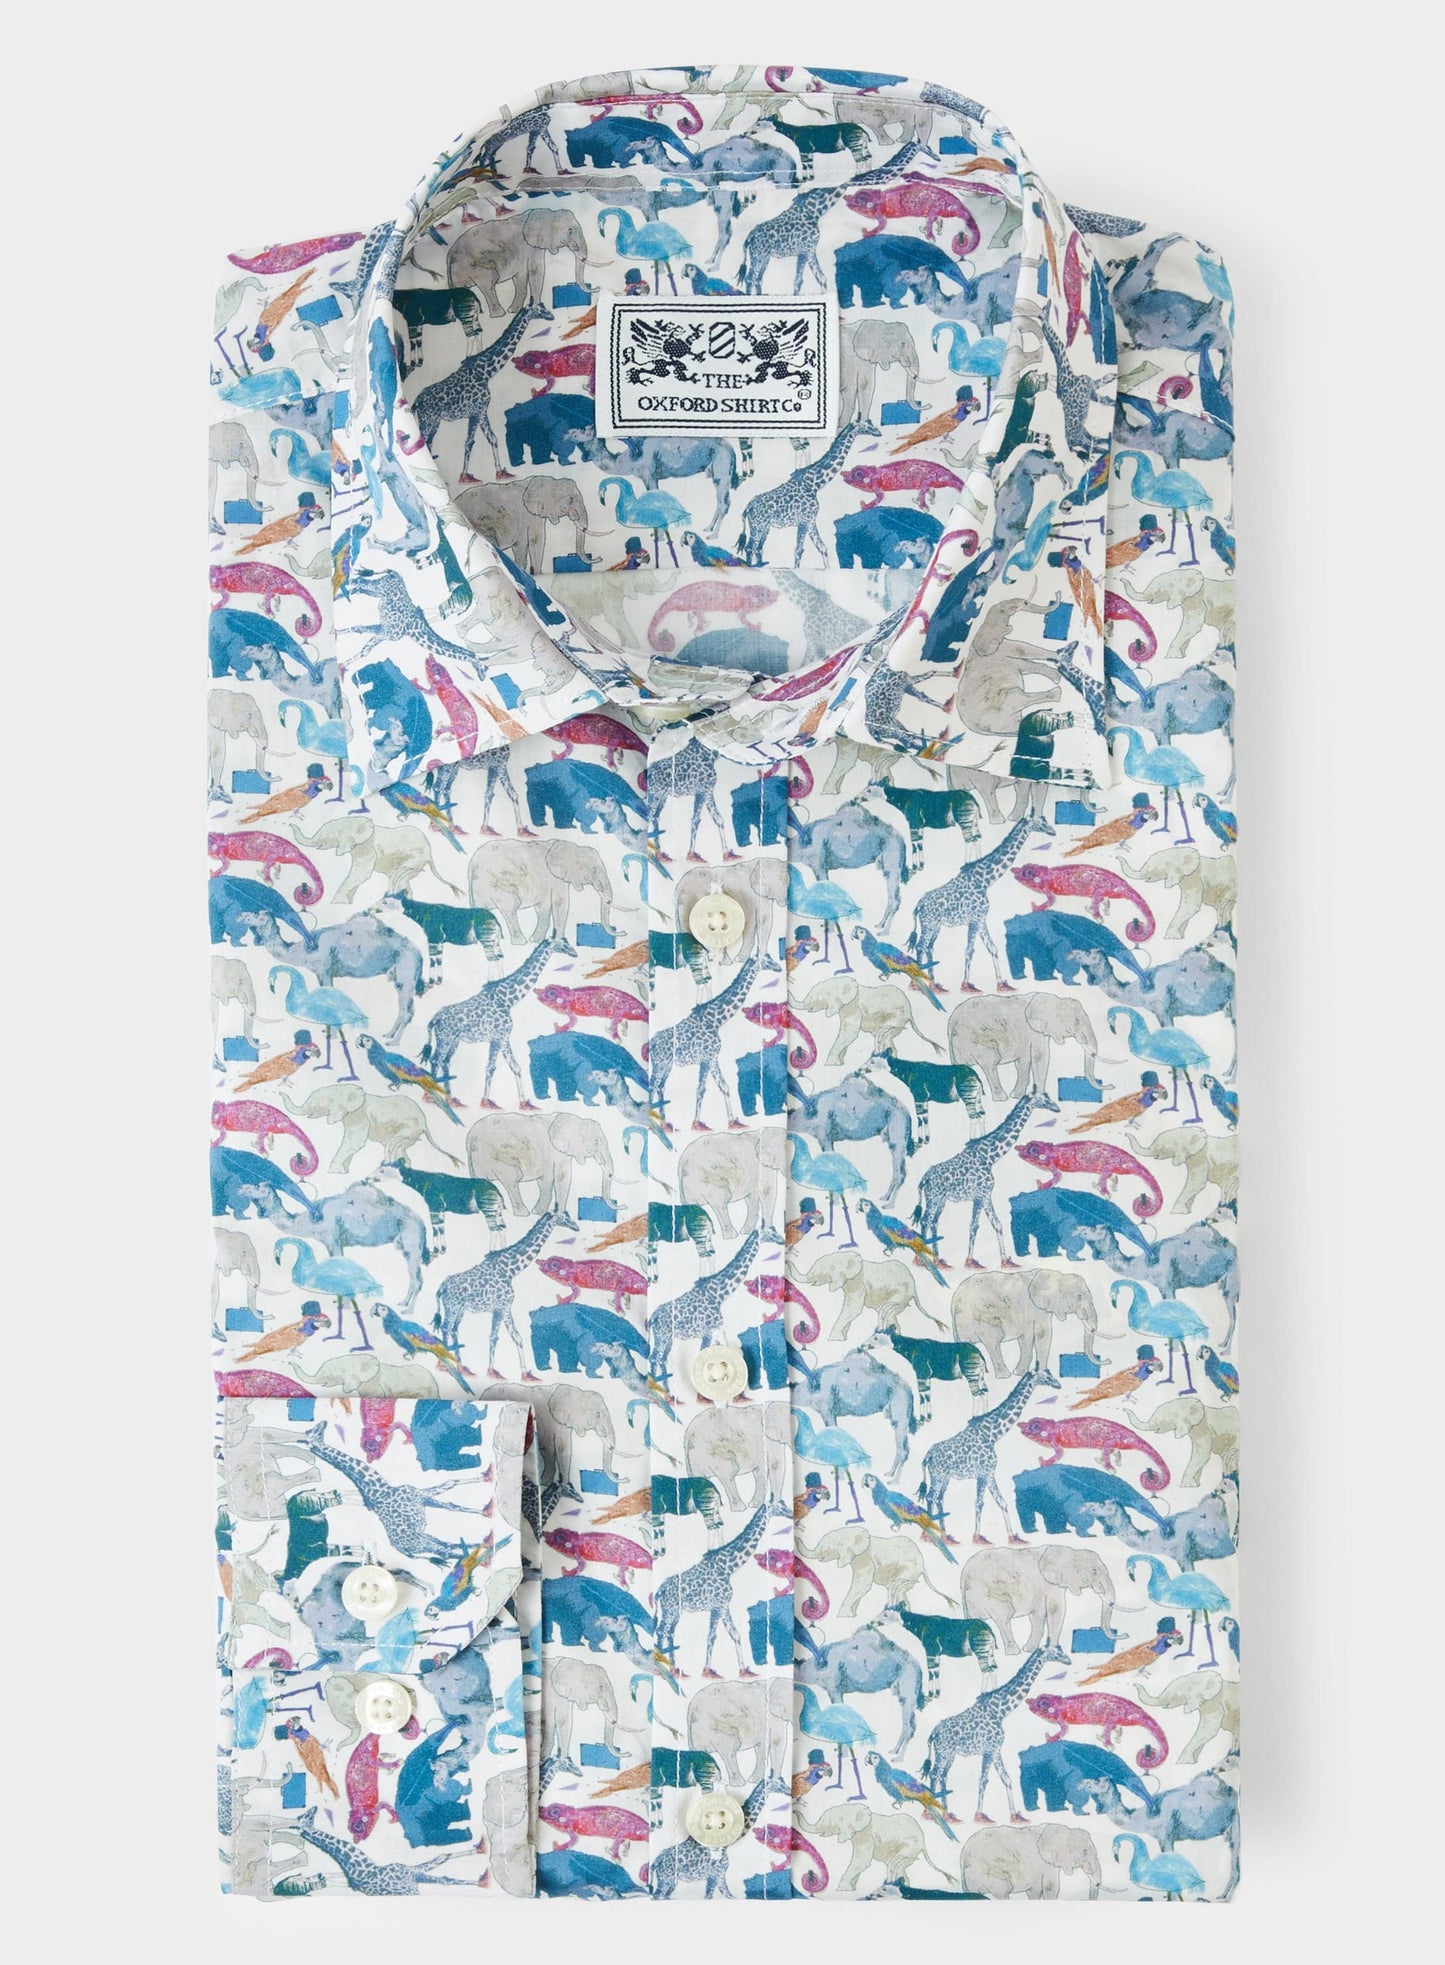 Queue for the Zoo Blue - Made with Liberty Fabric